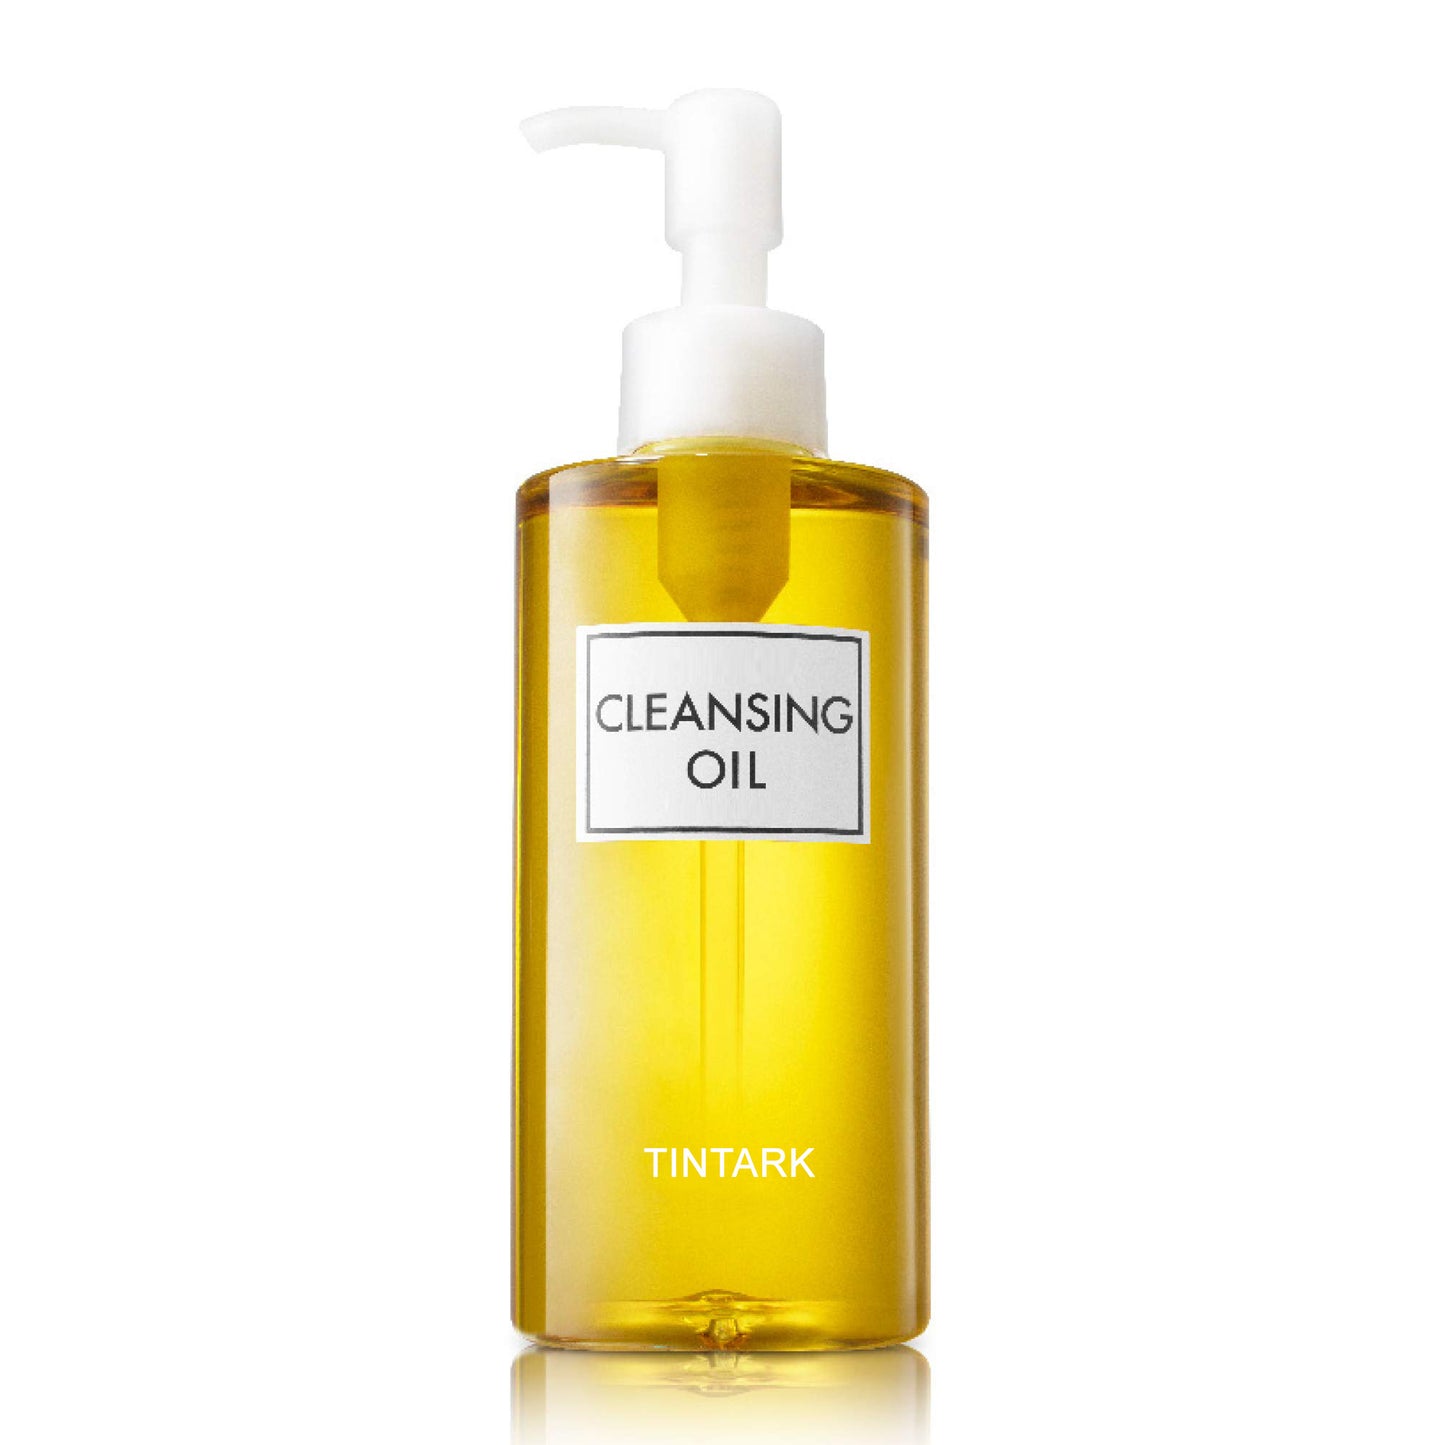 TINTARK Deep Cleansing Oil, Facial Cleansing Oil, Makeup Remover, Cleanses without Clogging Pores, Residue-Free, Fragrance and Colorant Free, All Skin Types